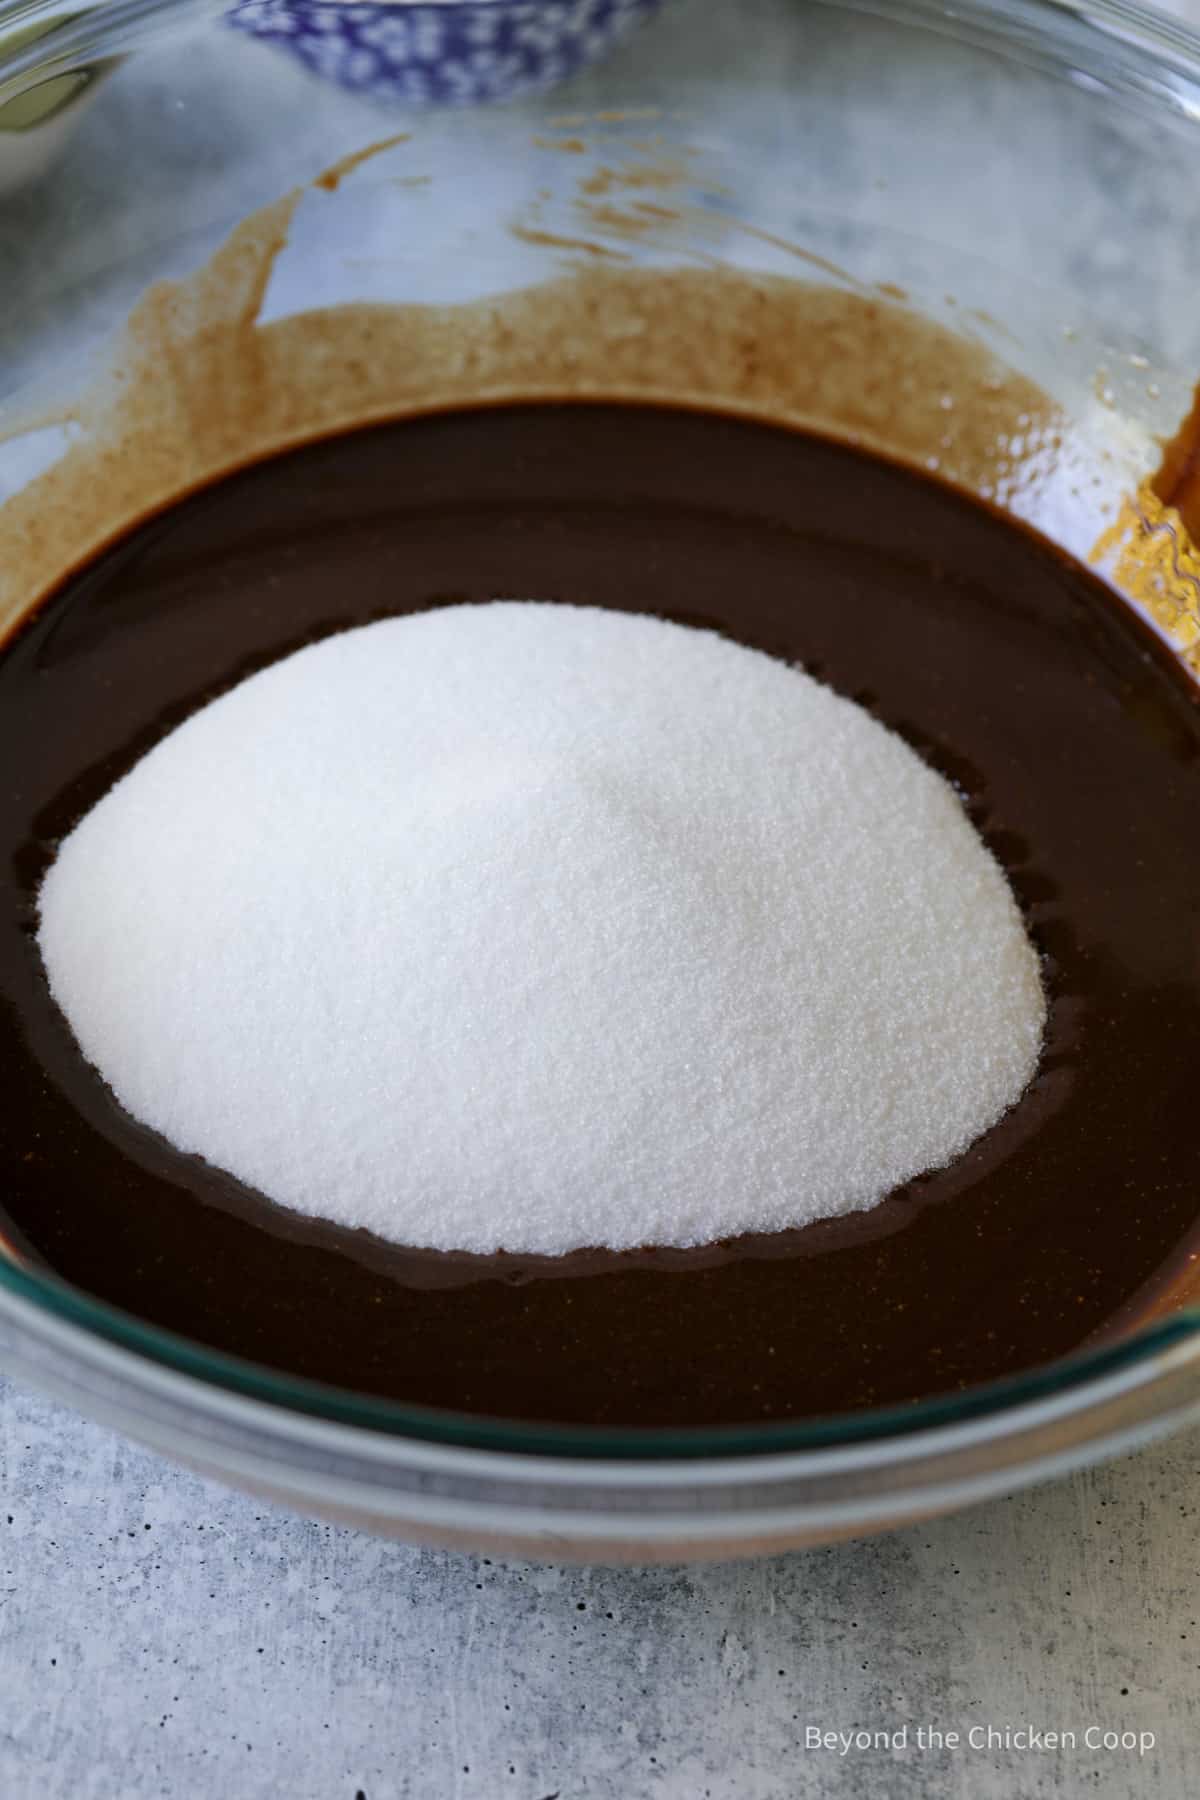 Sugar added to melted chocolate.